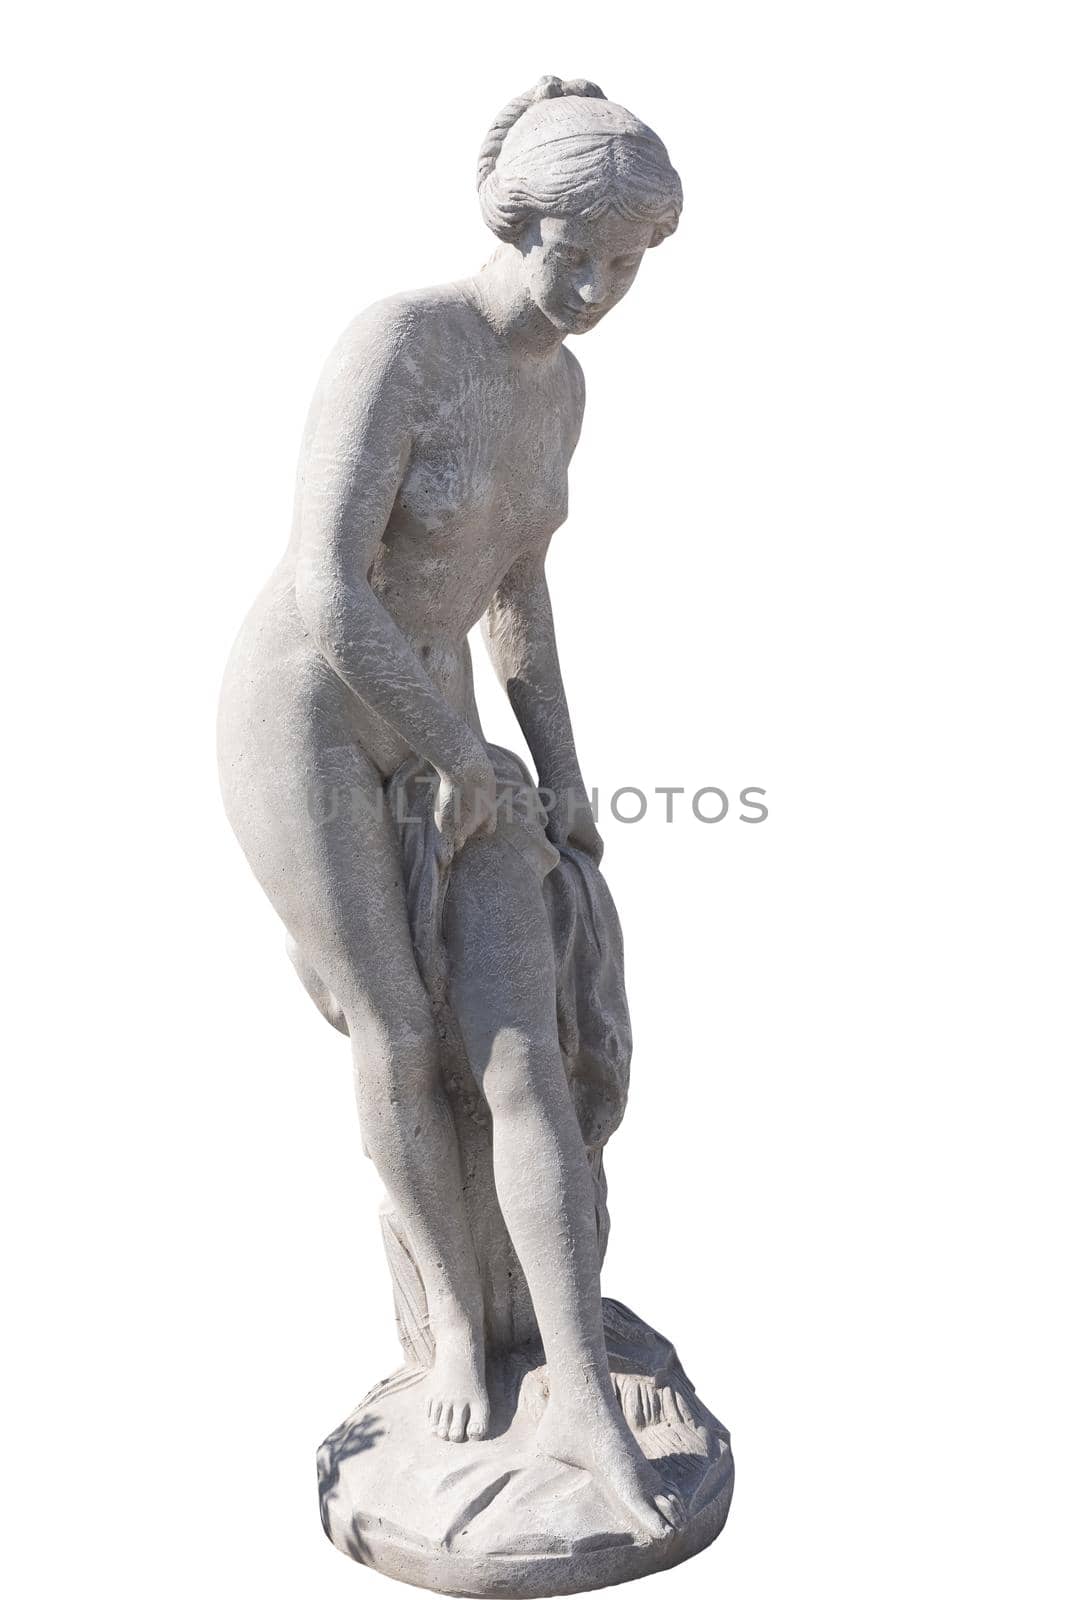 Stone sculpture of naked woman on white background by Wavebreakmedia